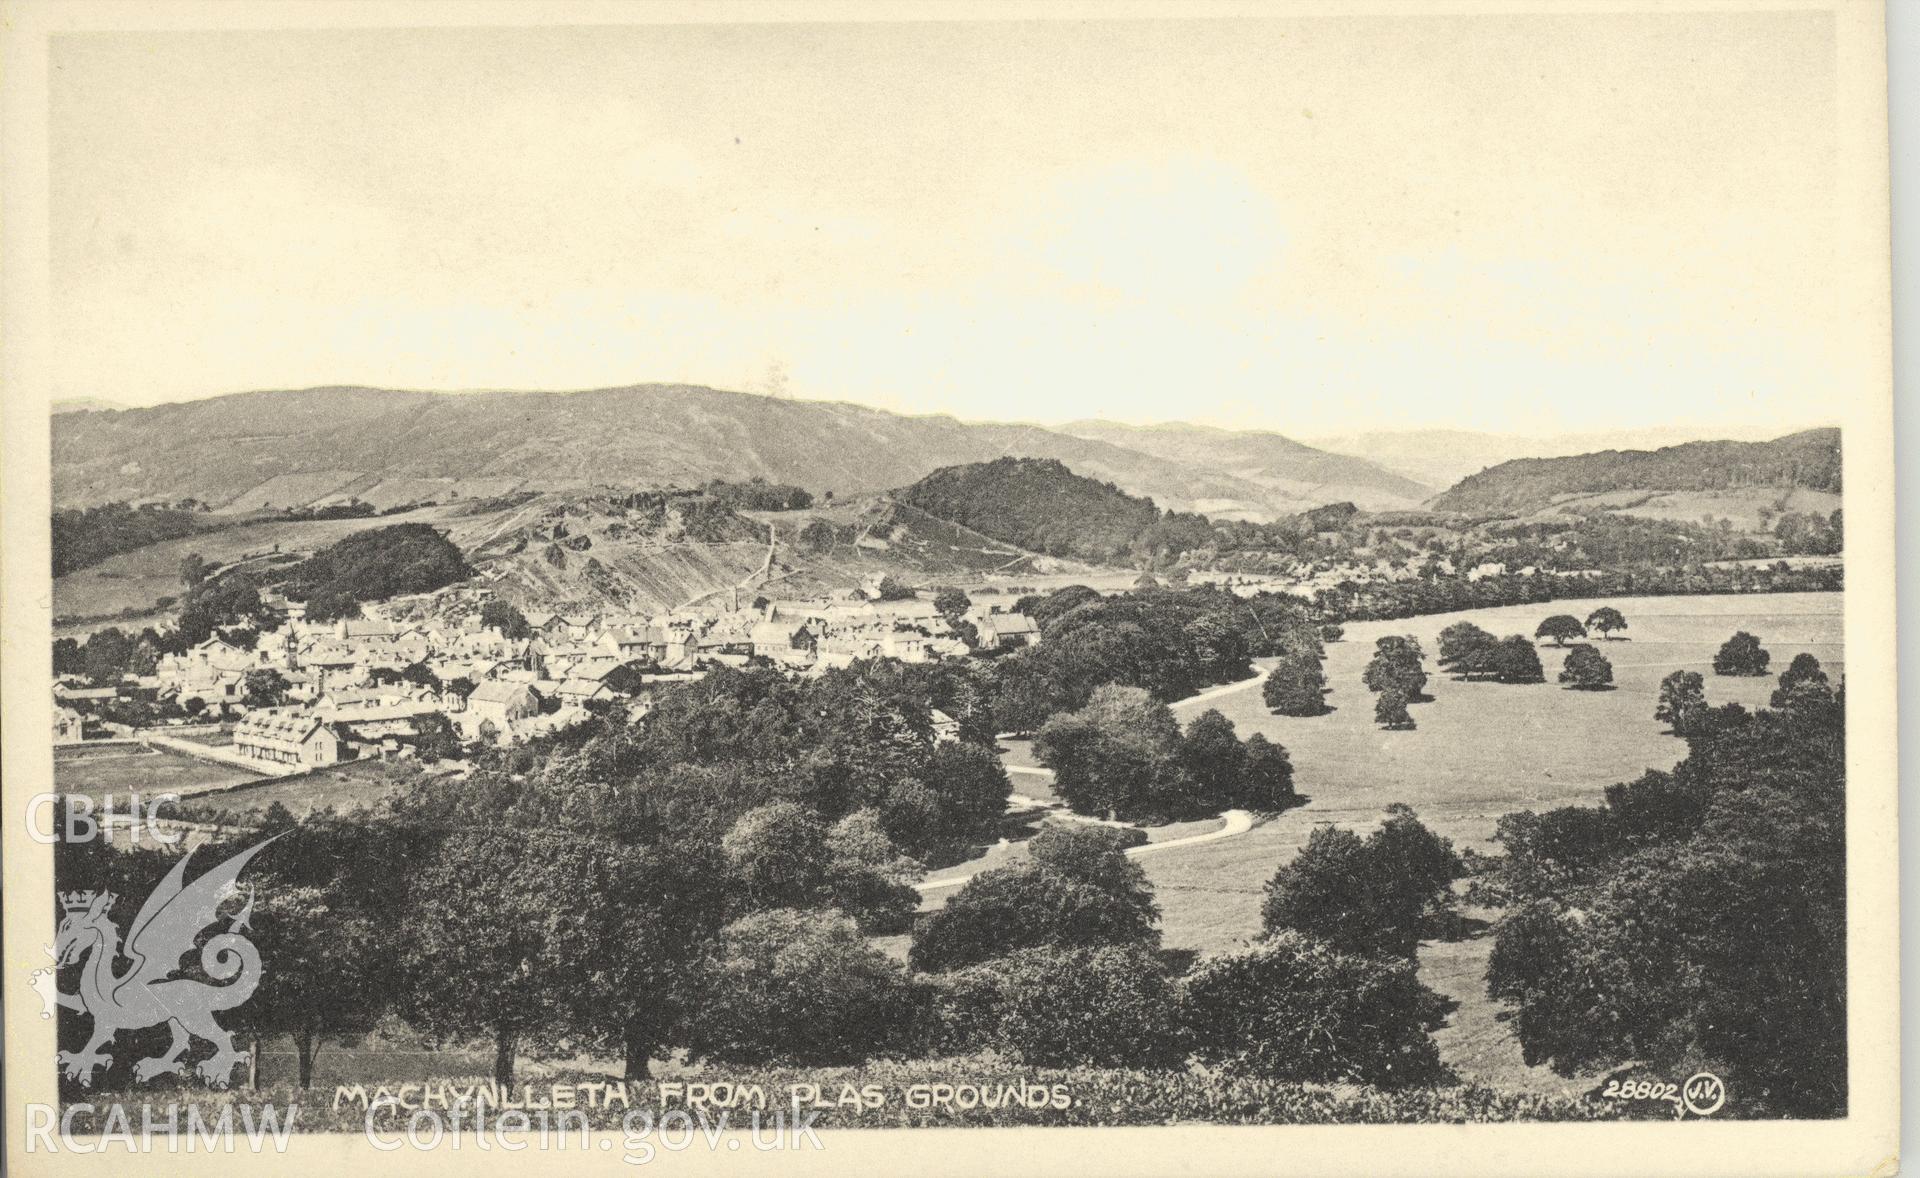 Digitised postcard image of Machynlleth town from high viewpoint above the Plas, Valentine and Sons Ltd. Produced by Parks and Gardens Data Services, from an original item in the Peter Davis Collection at Parks and Gardens UK. We hold only web-resolution images of this collection, suitable for viewing on screen and for research purposes only. We do not hold the original images, or publication quality scans.